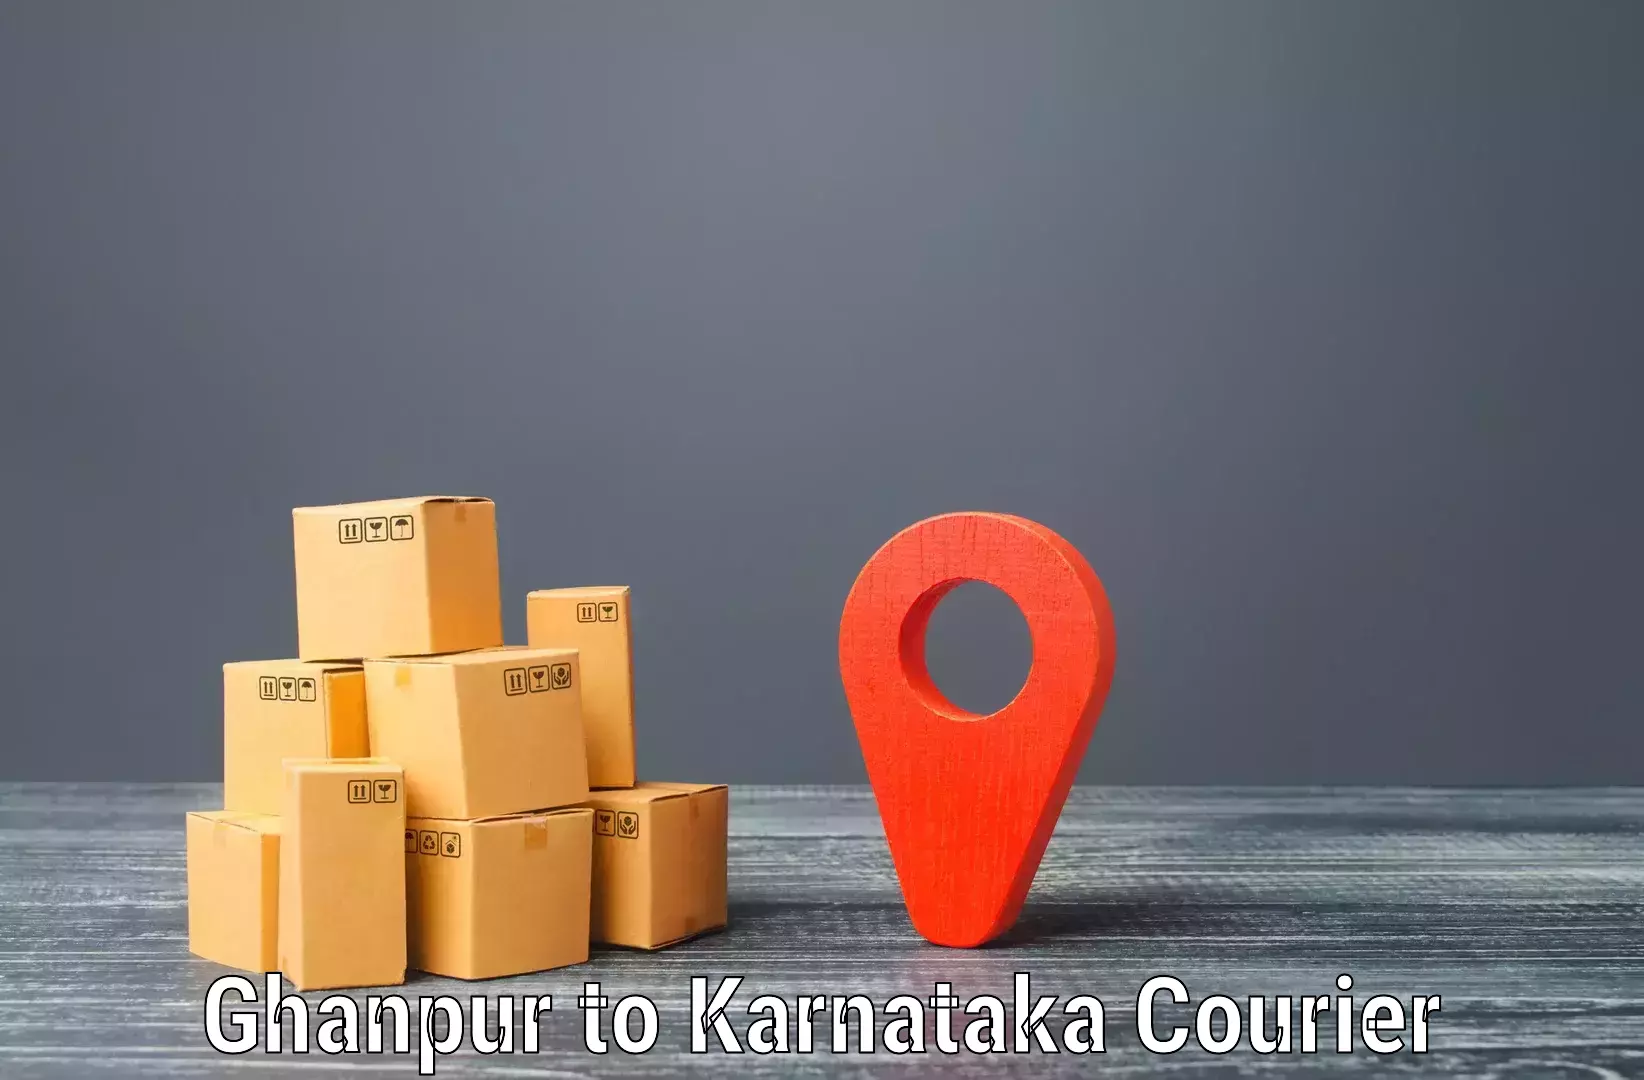 Comprehensive shipping network Ghanpur to Laxmeshwar